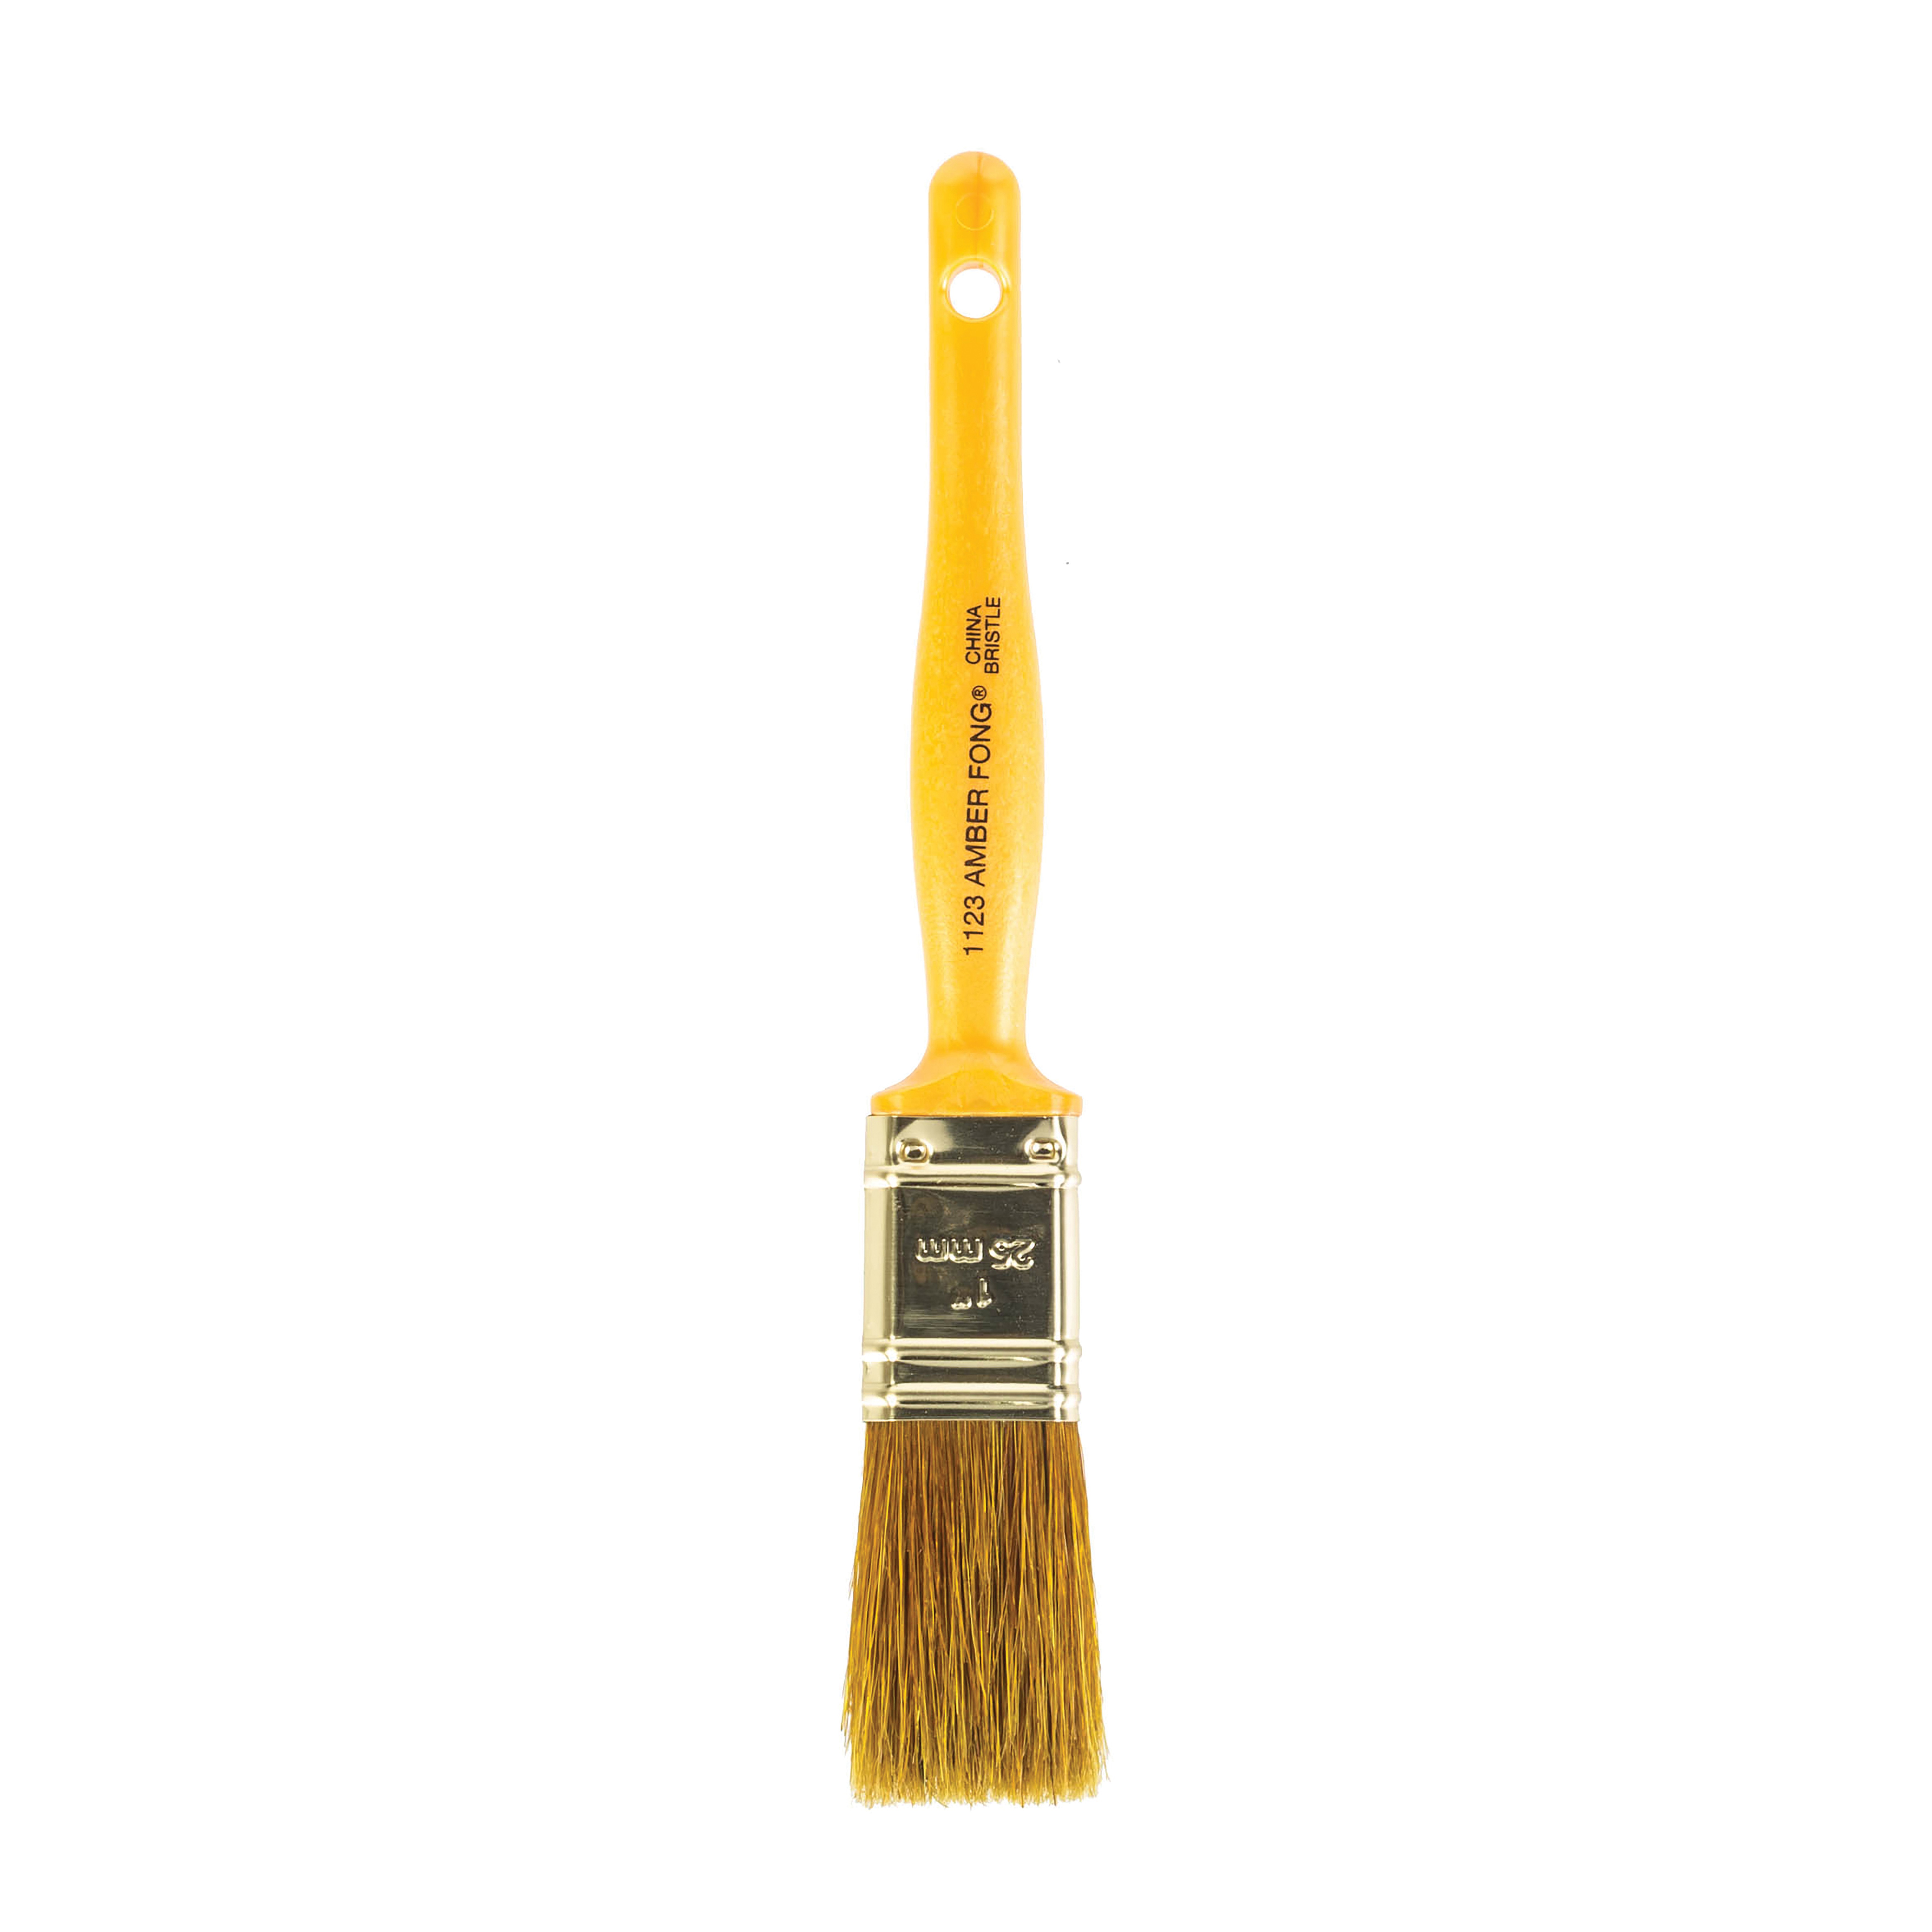 Wooster 1123-1 Paint Brush, China Bristle